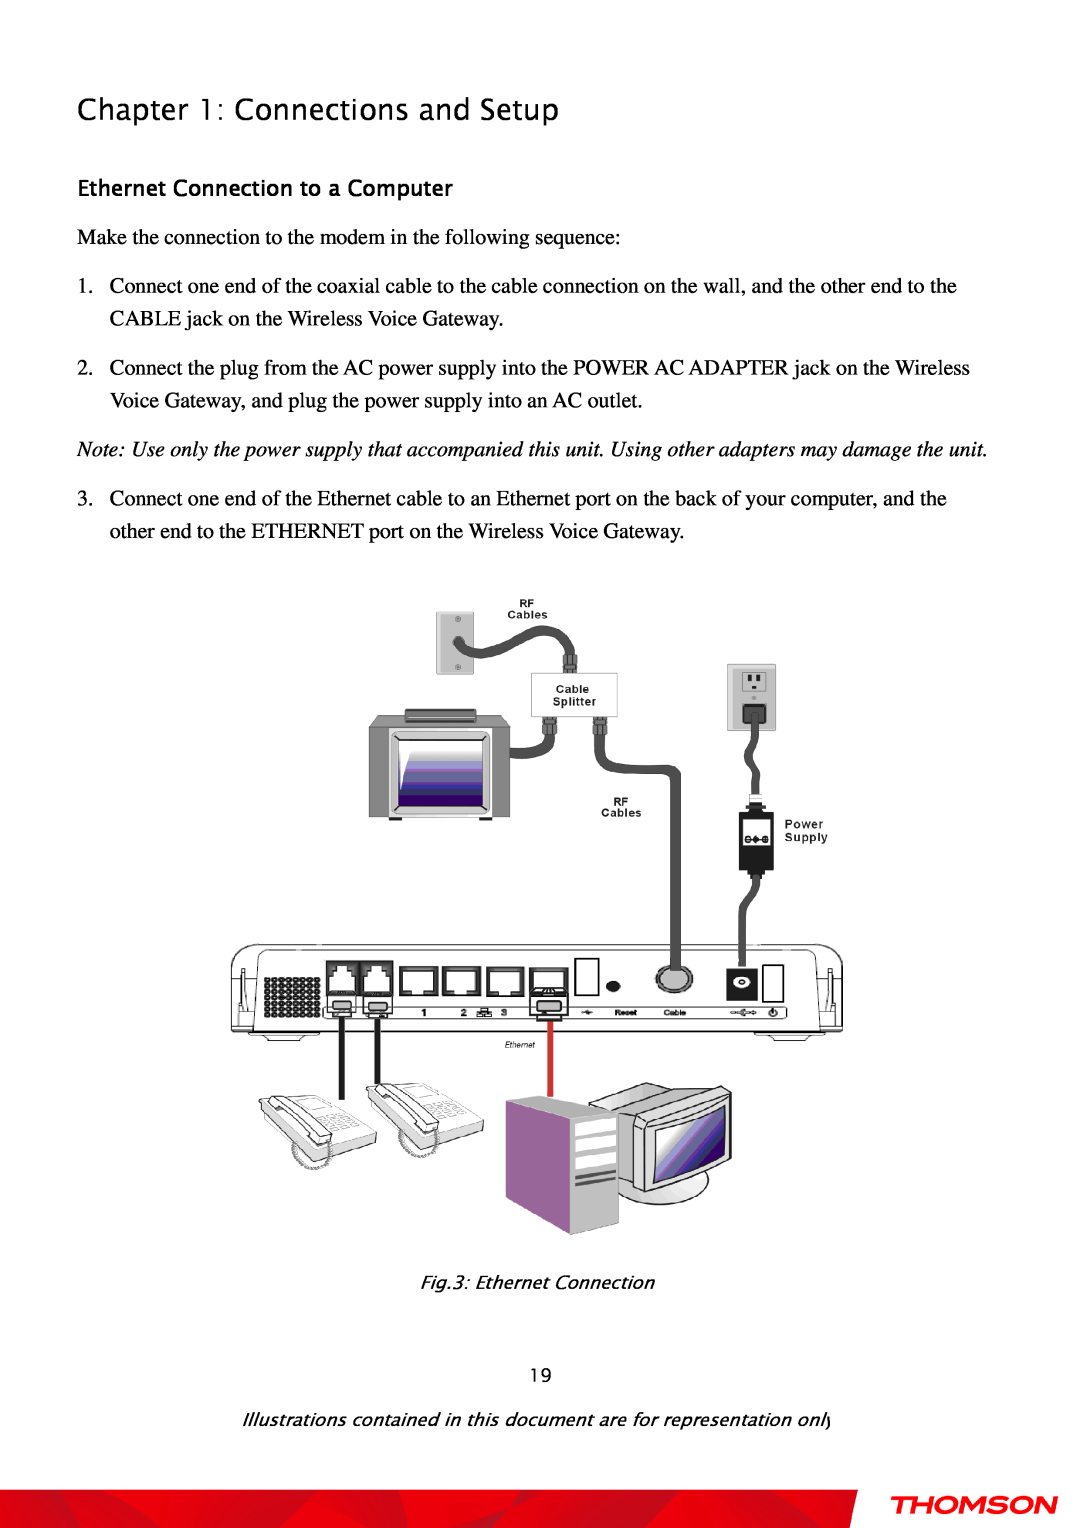 Gateway TWG870 user manual Connections and Setup, Ethernet Connection to a Computer 